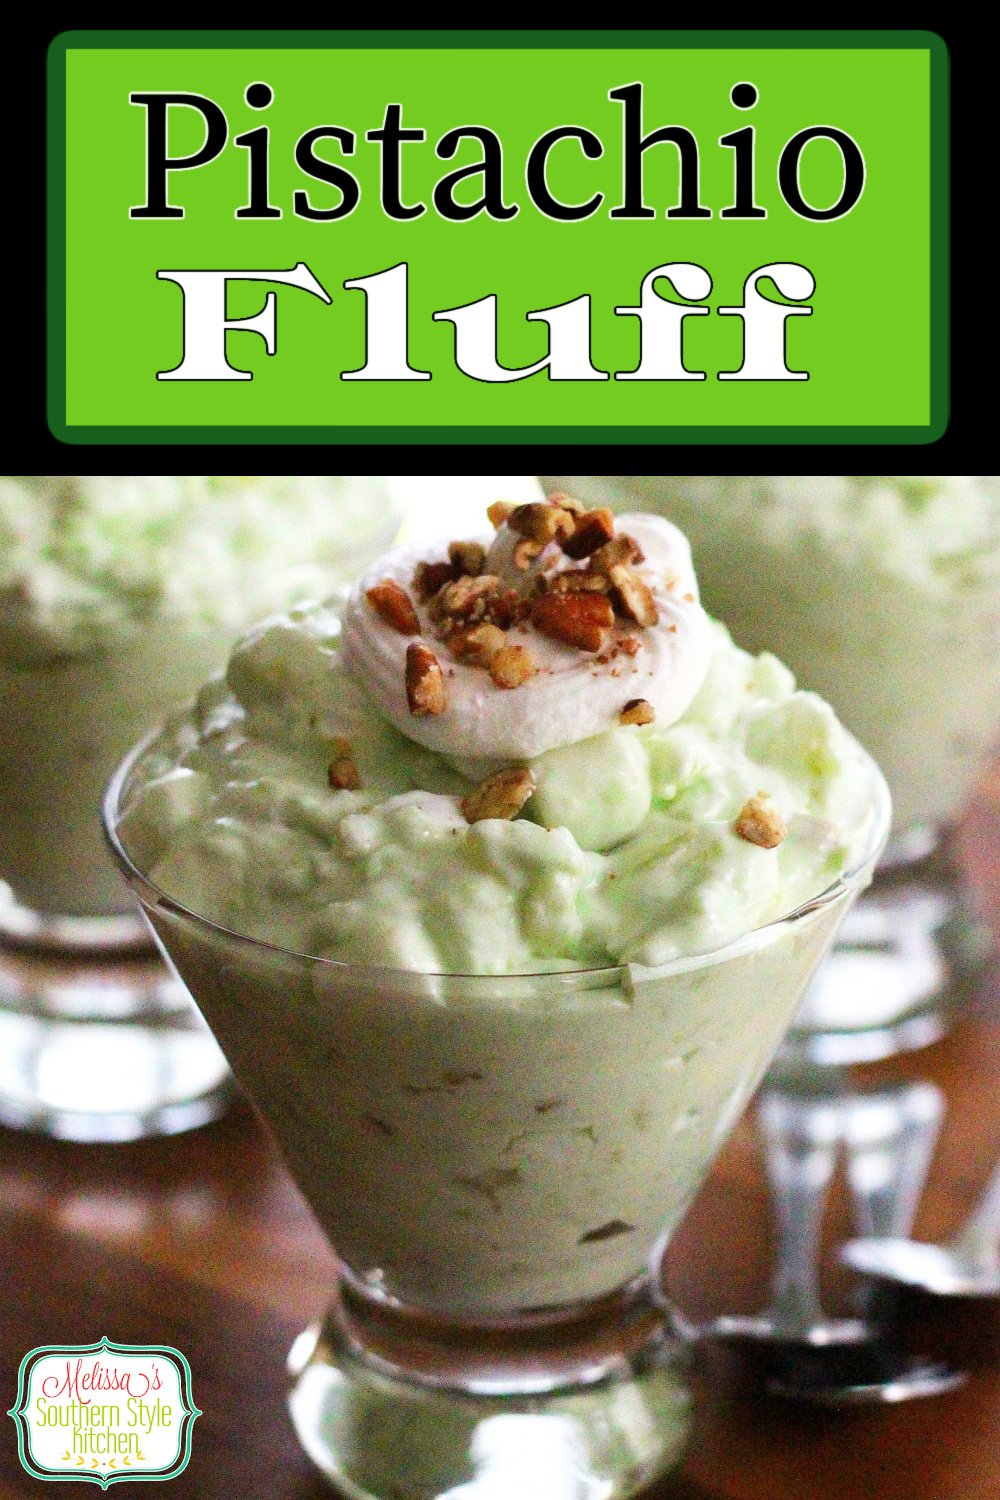 This scrumptious Pistachio Fluff a.k.a. Watergate Salad, is a vintage fruity dessert that you're sure to find yourself making over and over again. #pistachiofluff #fluffrecipes #watergatesalad #nobakedesserts #pistachio #holidayrecipes #desserts #dessertfoodrecipes #southernfood #southernrecipes via @melissasssk